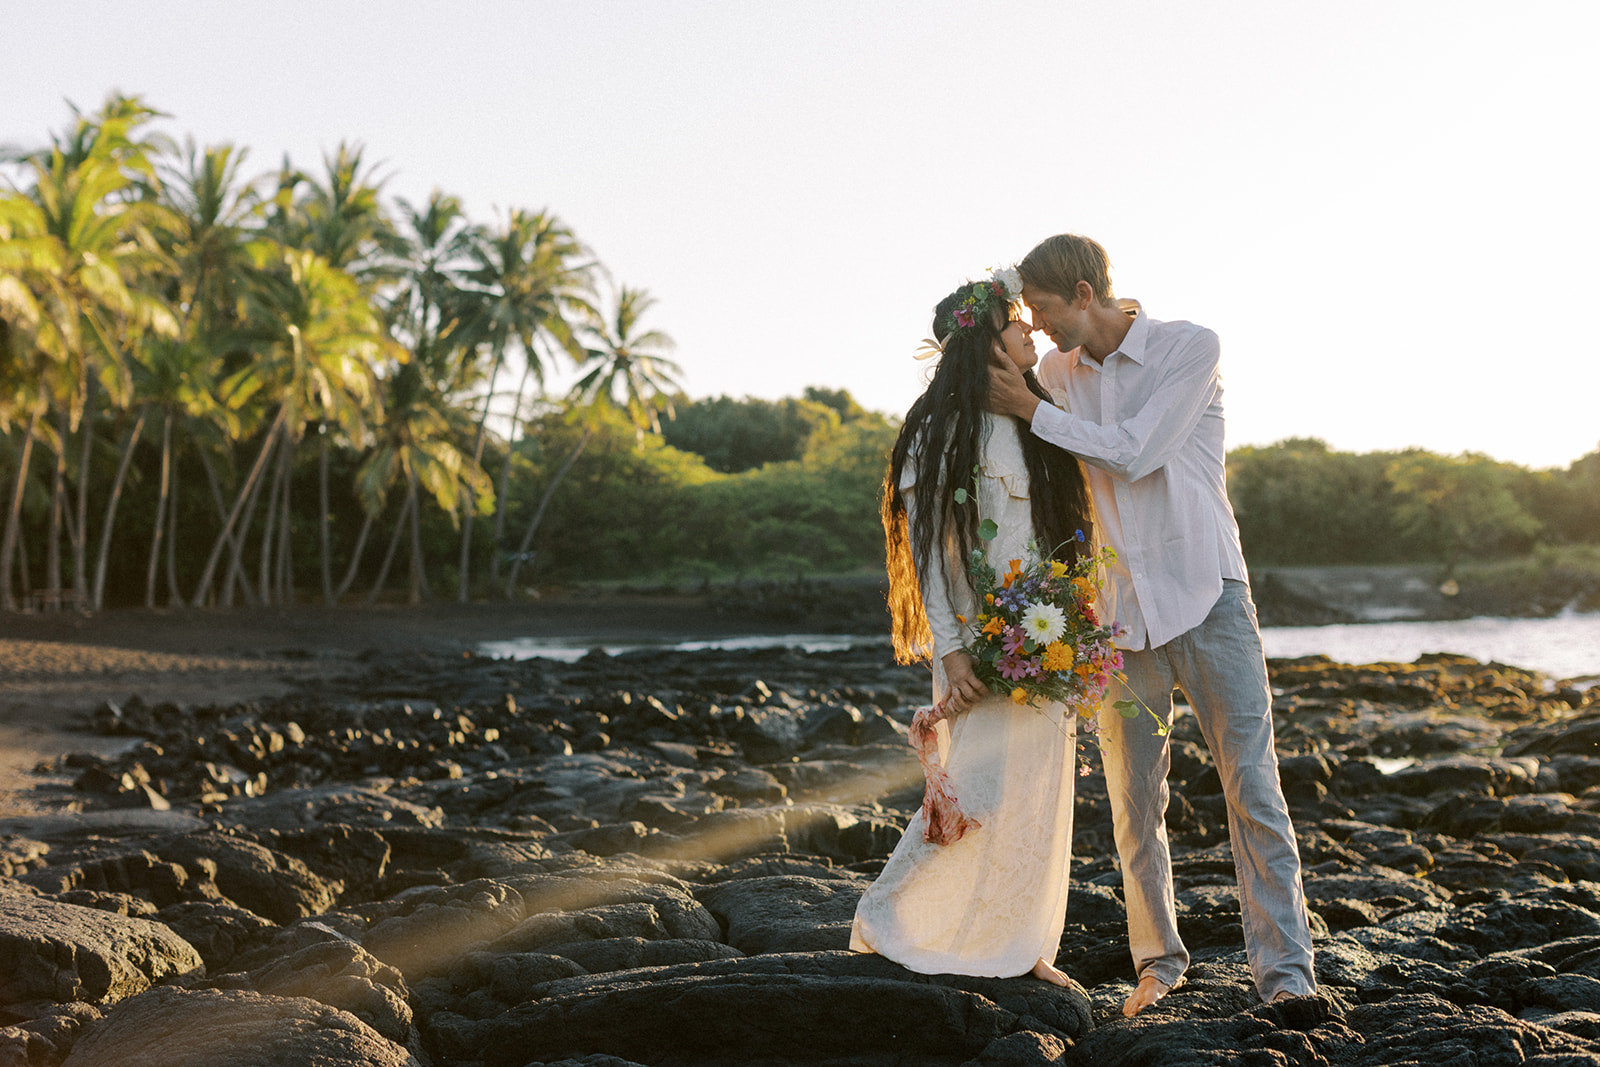 Punalu'u elopement photo with the coconut trees and black sand in the background.